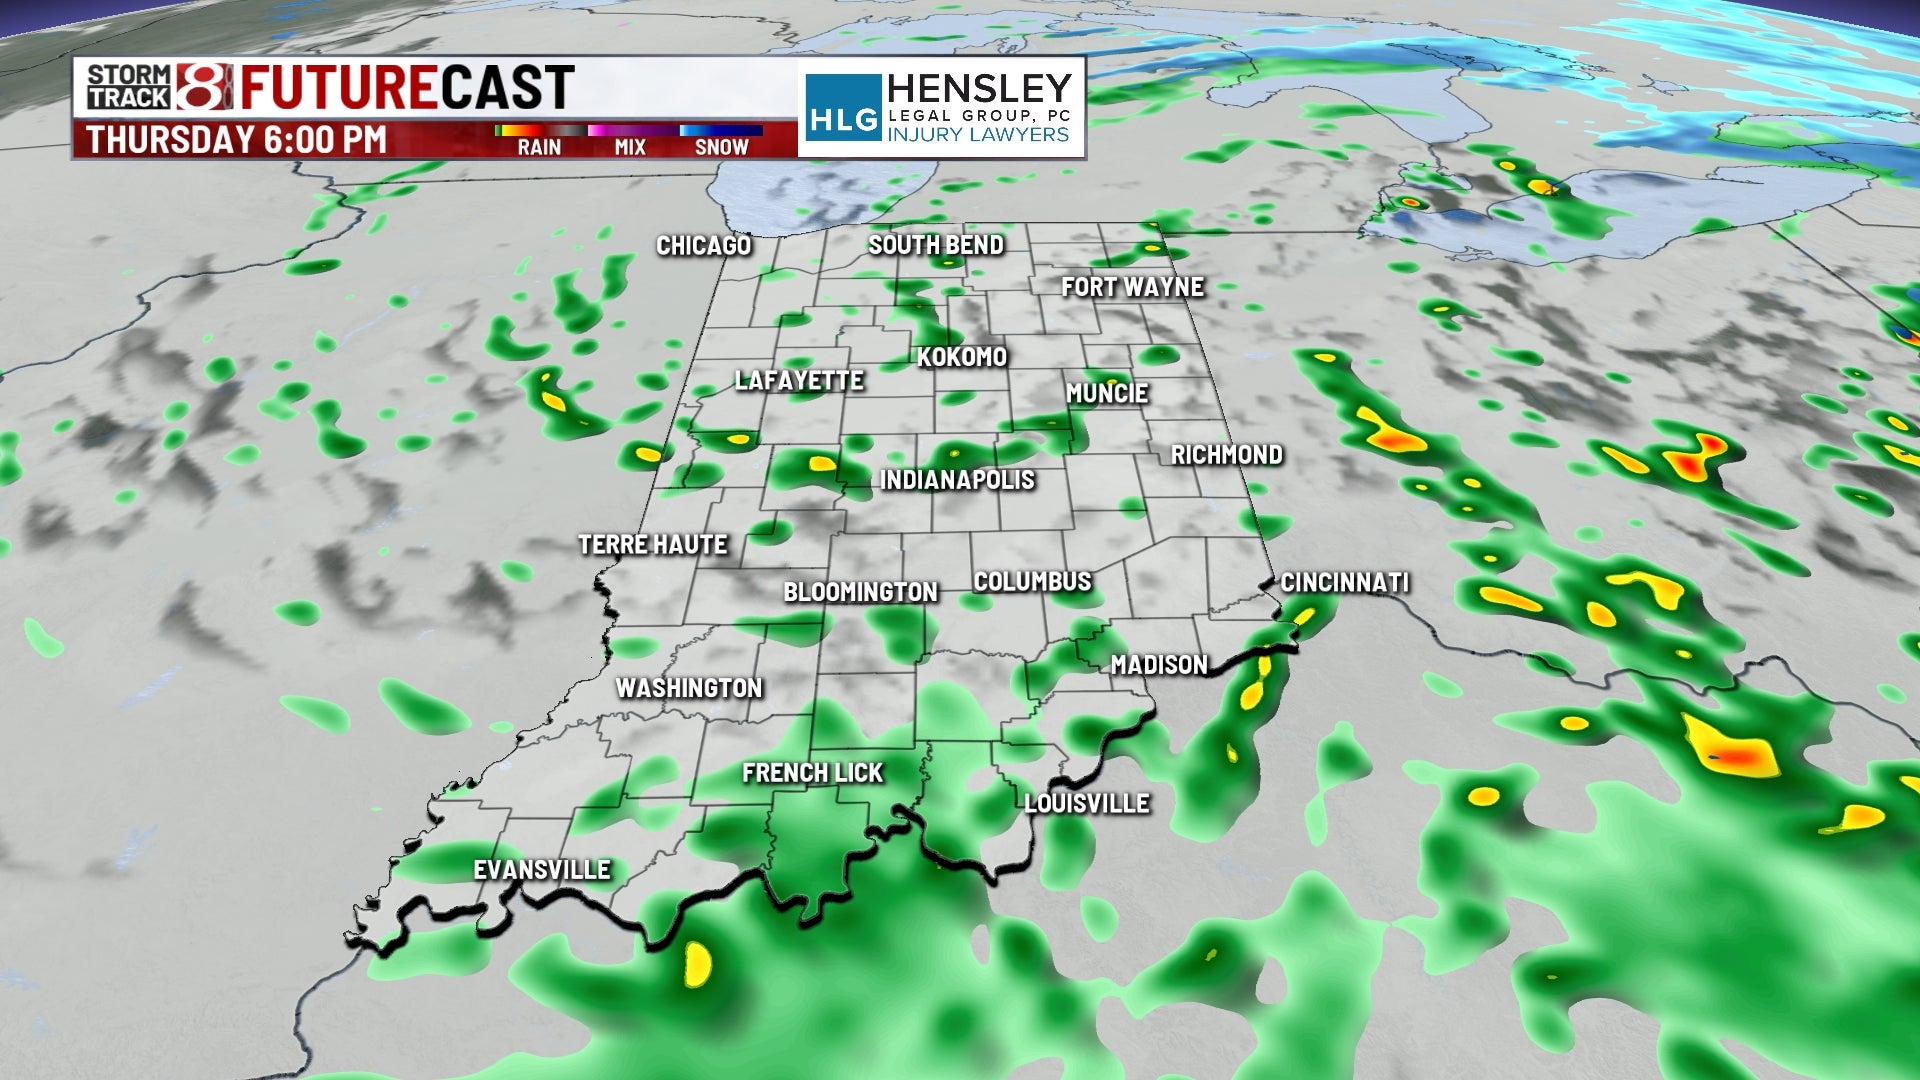 More scattered cold rain Thursday, temperatures slow to warm into the weekend